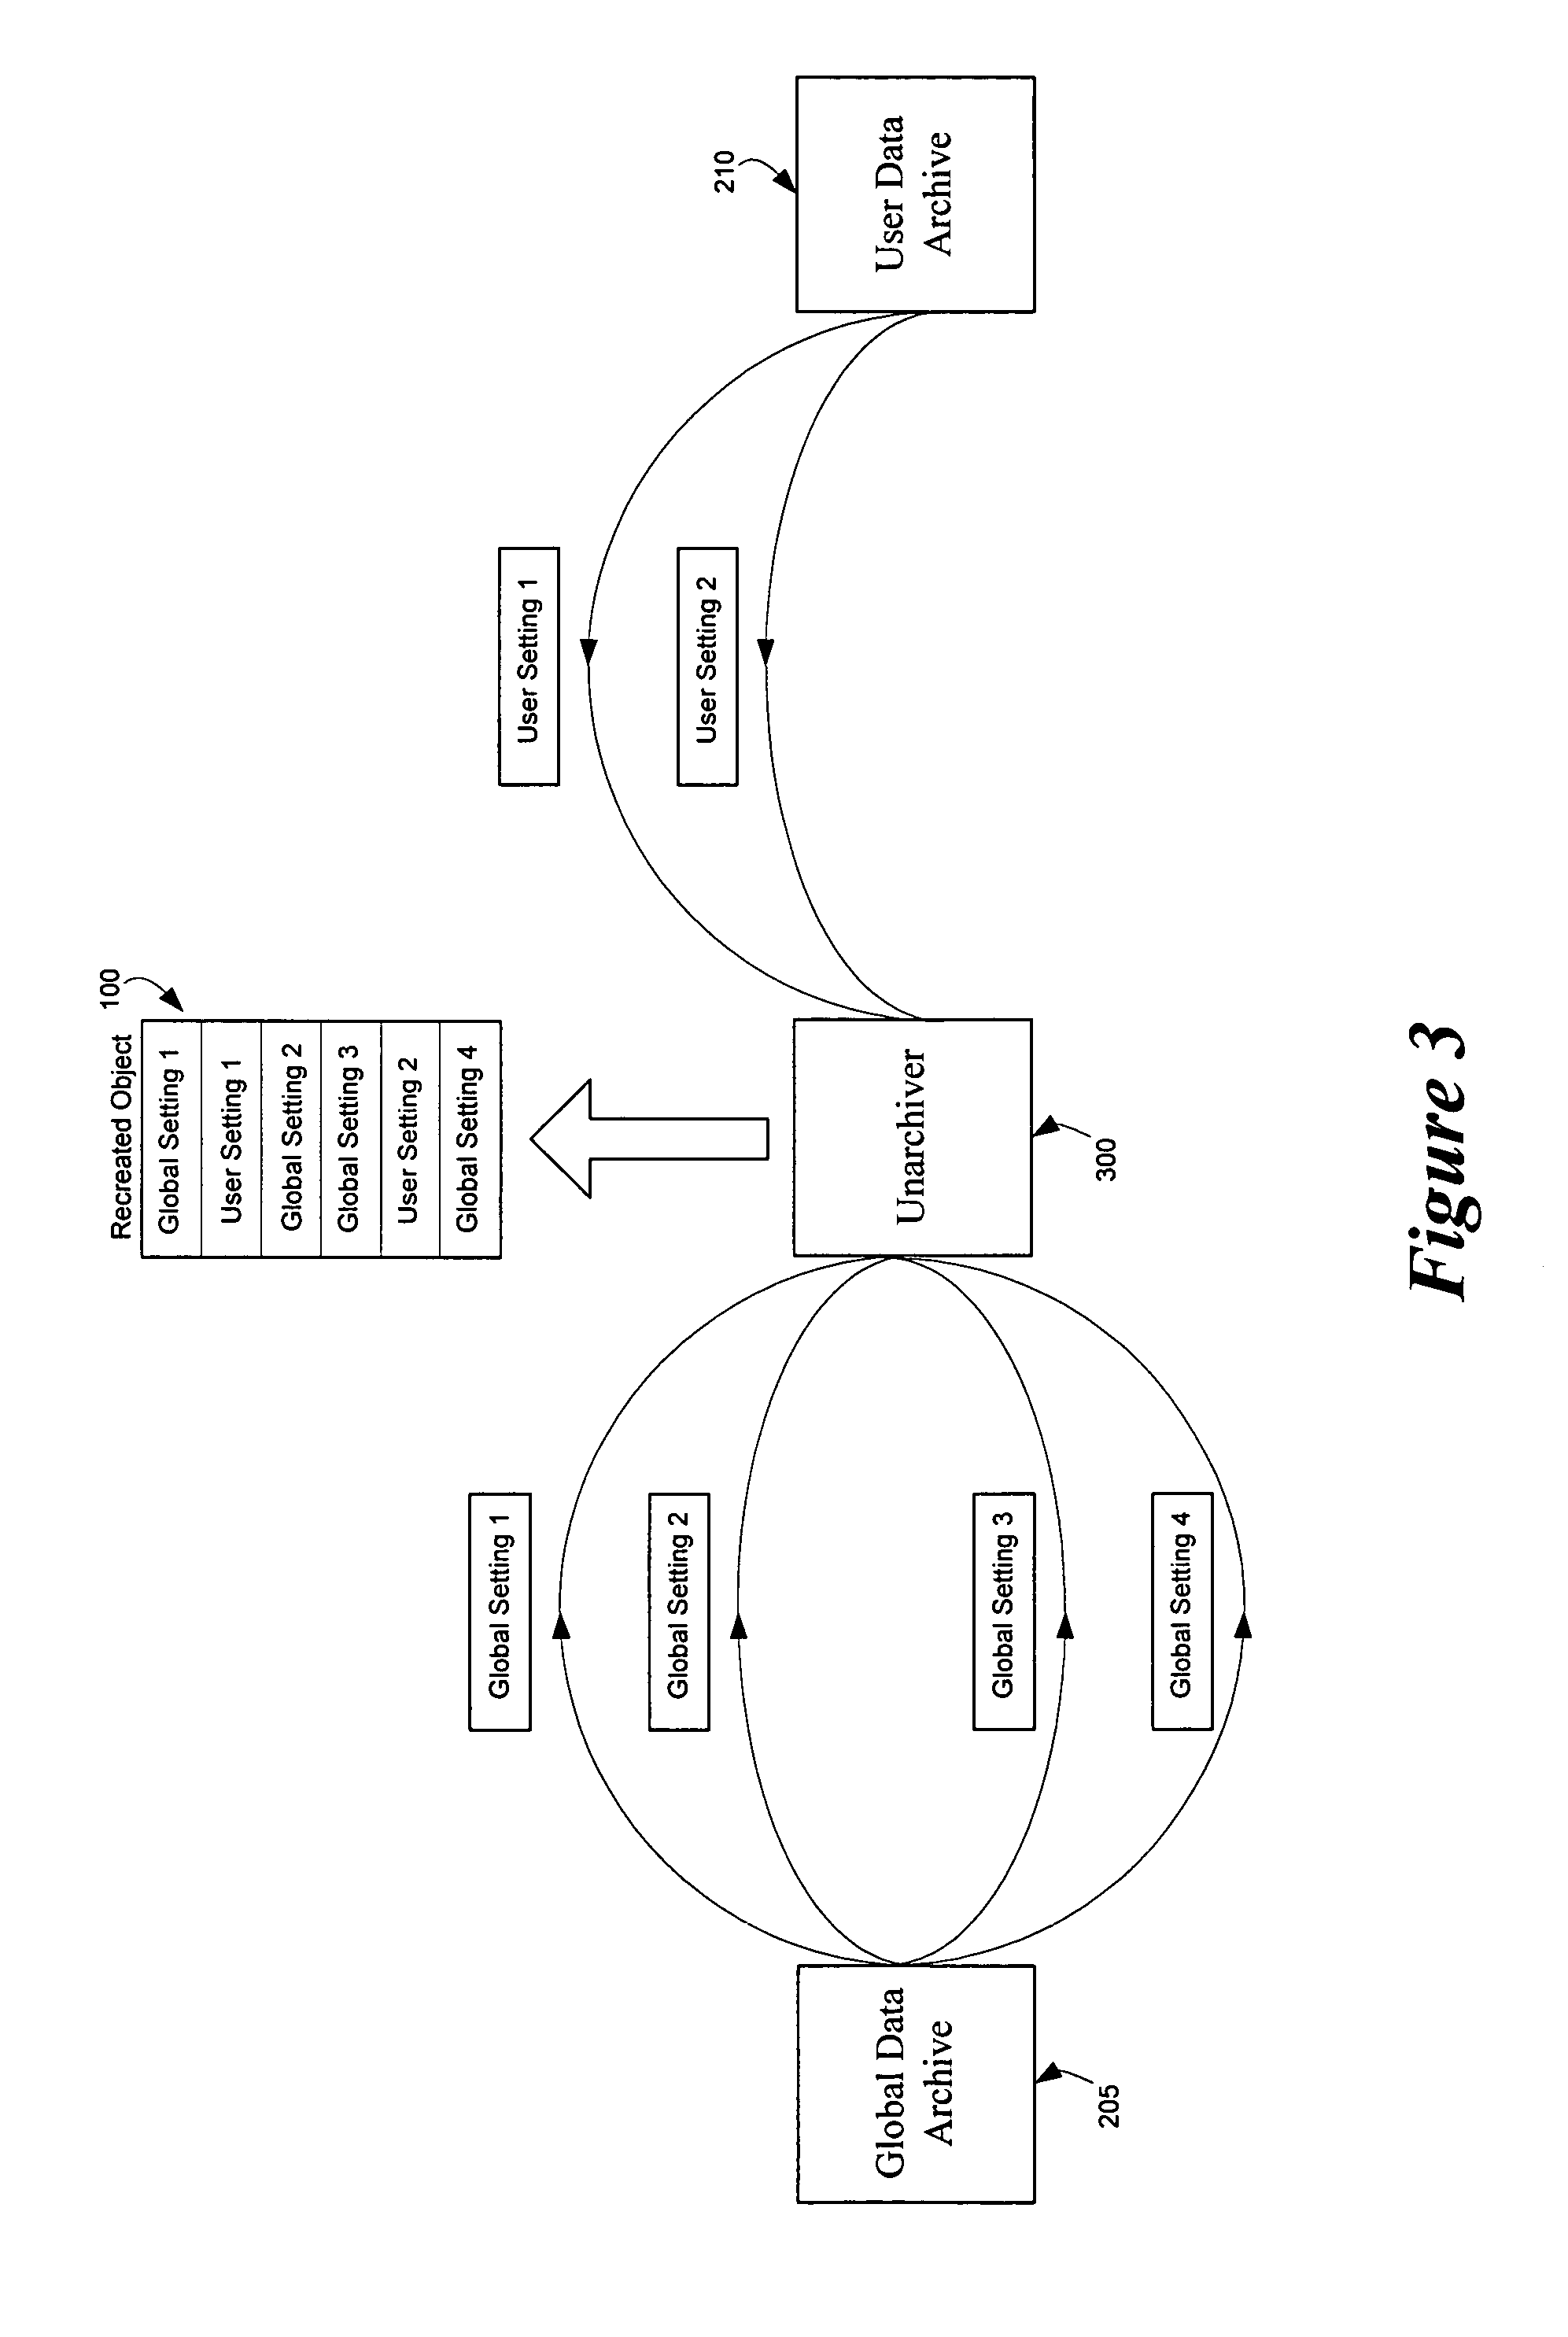 Method and apparatus for archiving and unarchiving objects